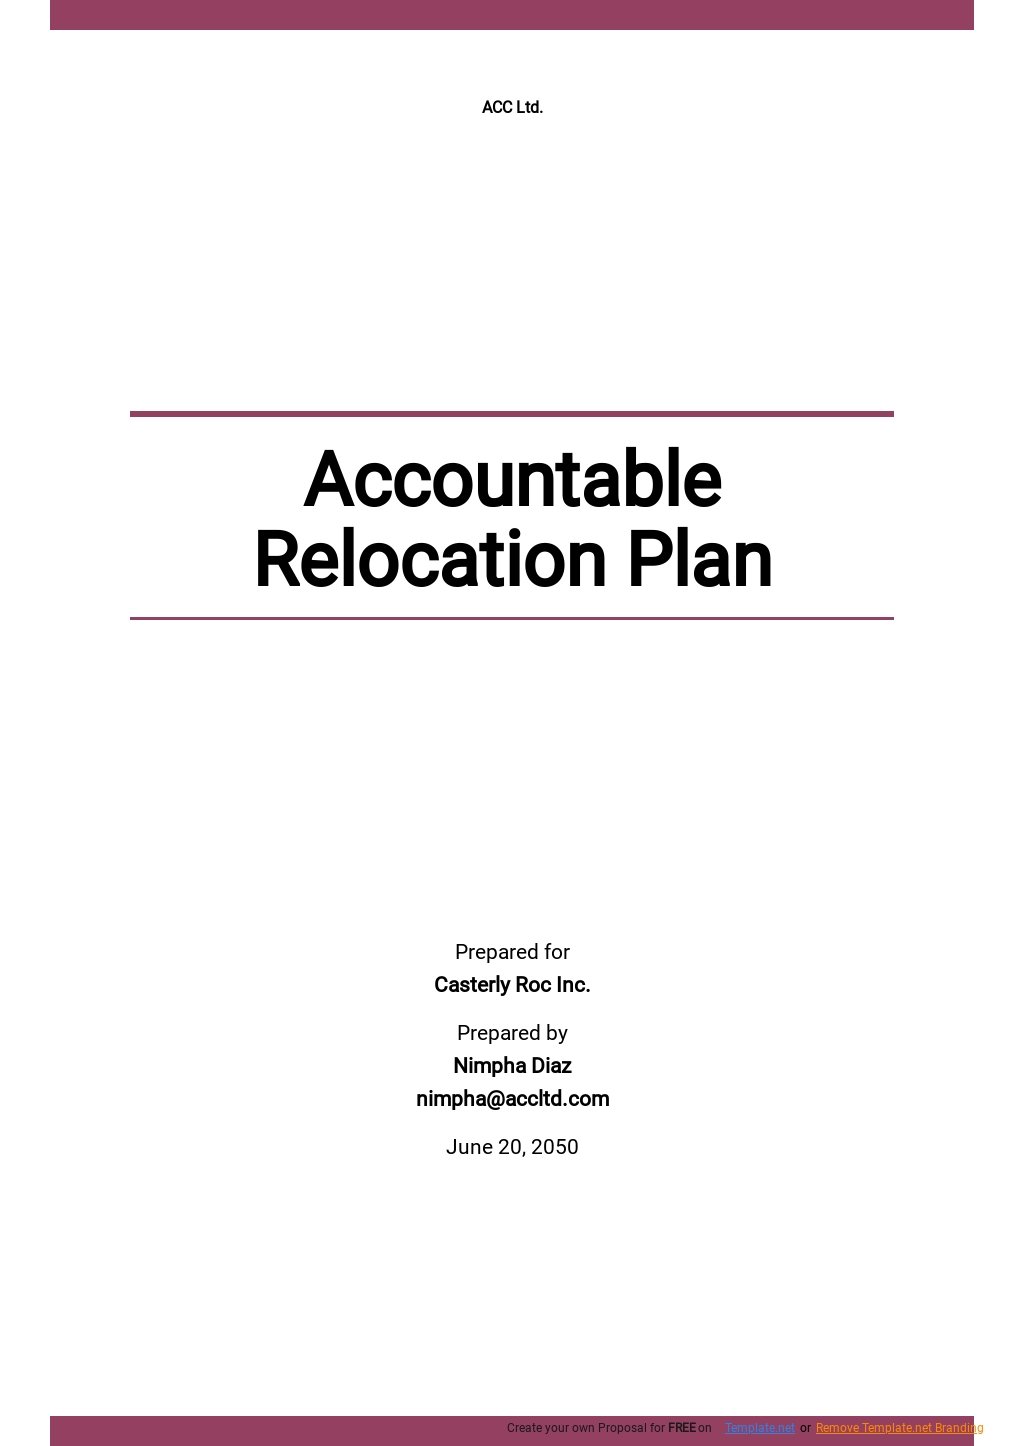 Accountable Relocation Plan Template